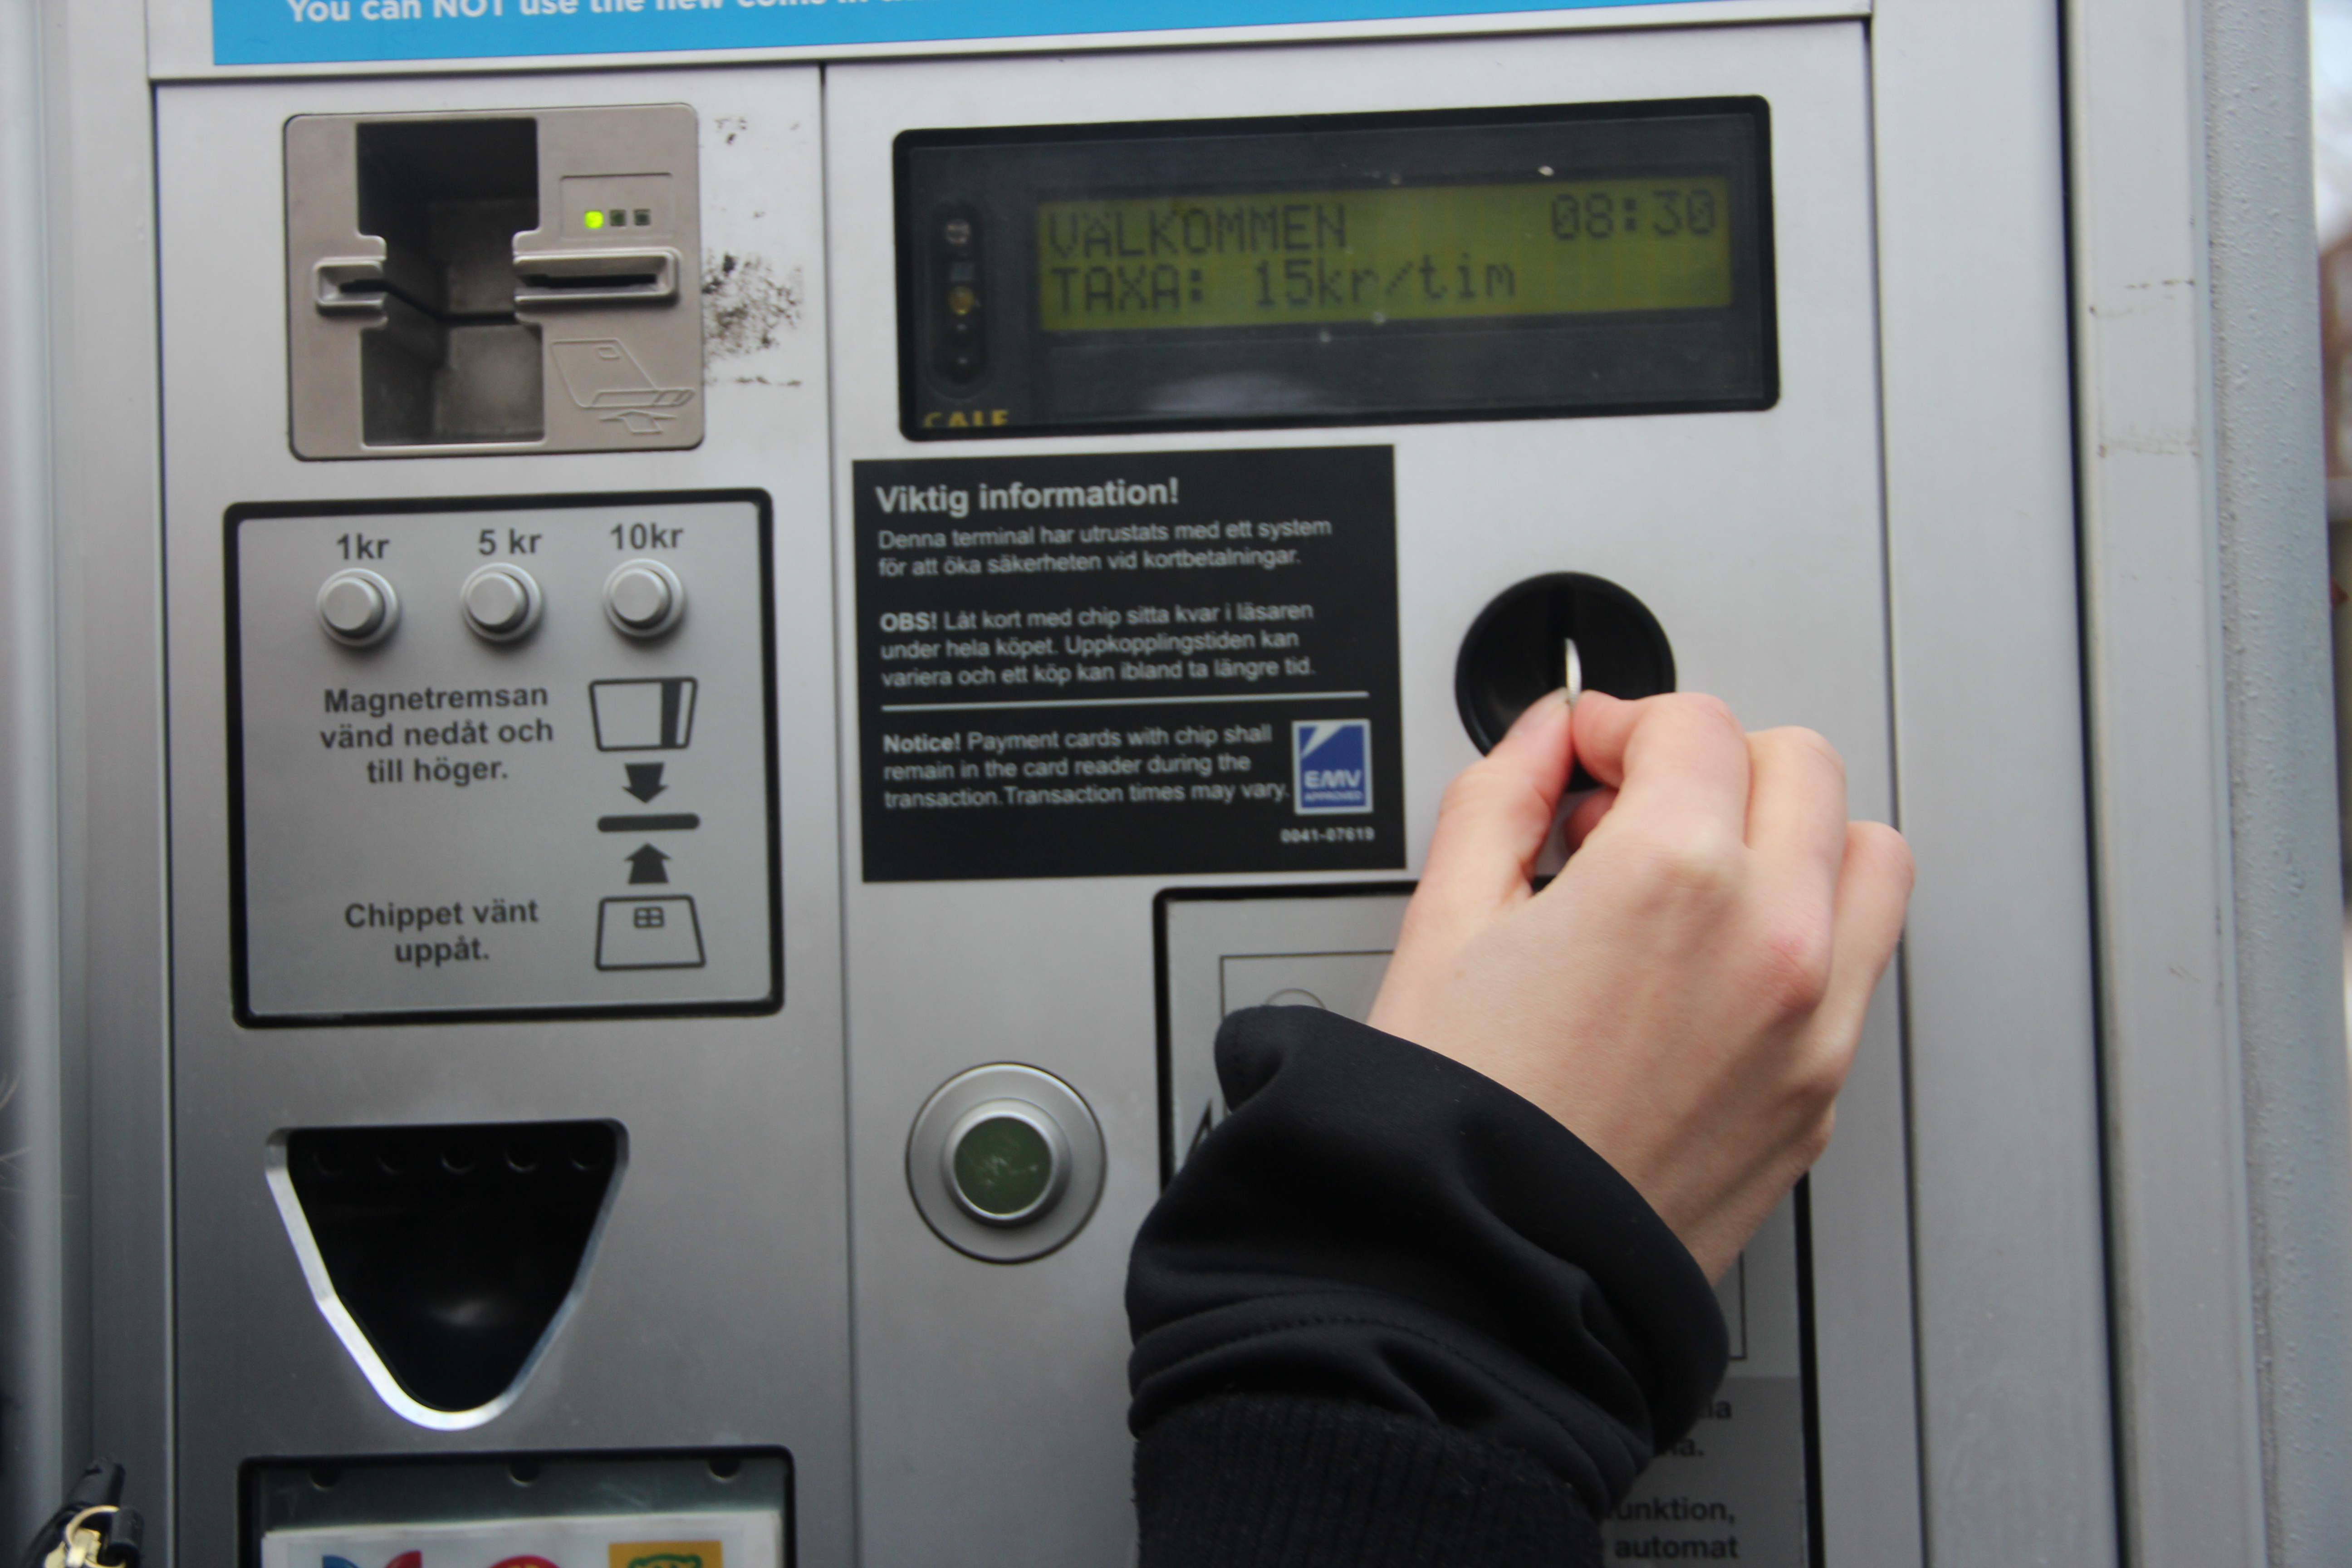 A hand inserting a coin into the parking meter to pay for a ticket